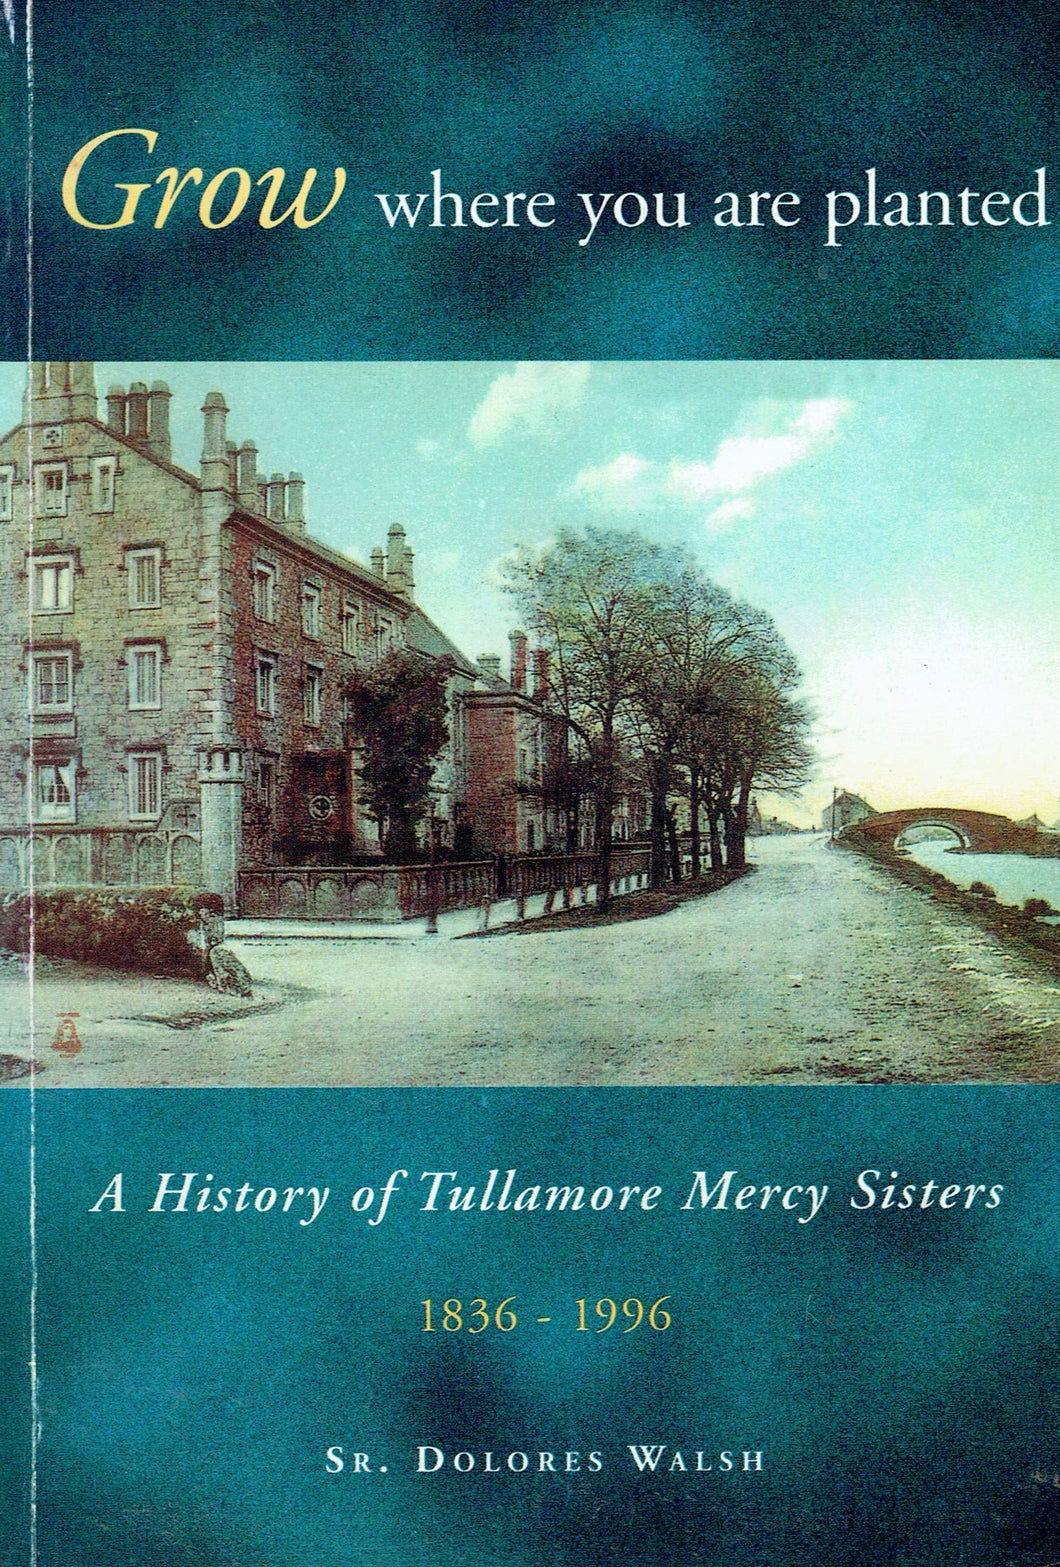 Grow Where You Are Planted: a History of Tullamore Mercy Sisters, 1836 - 1996